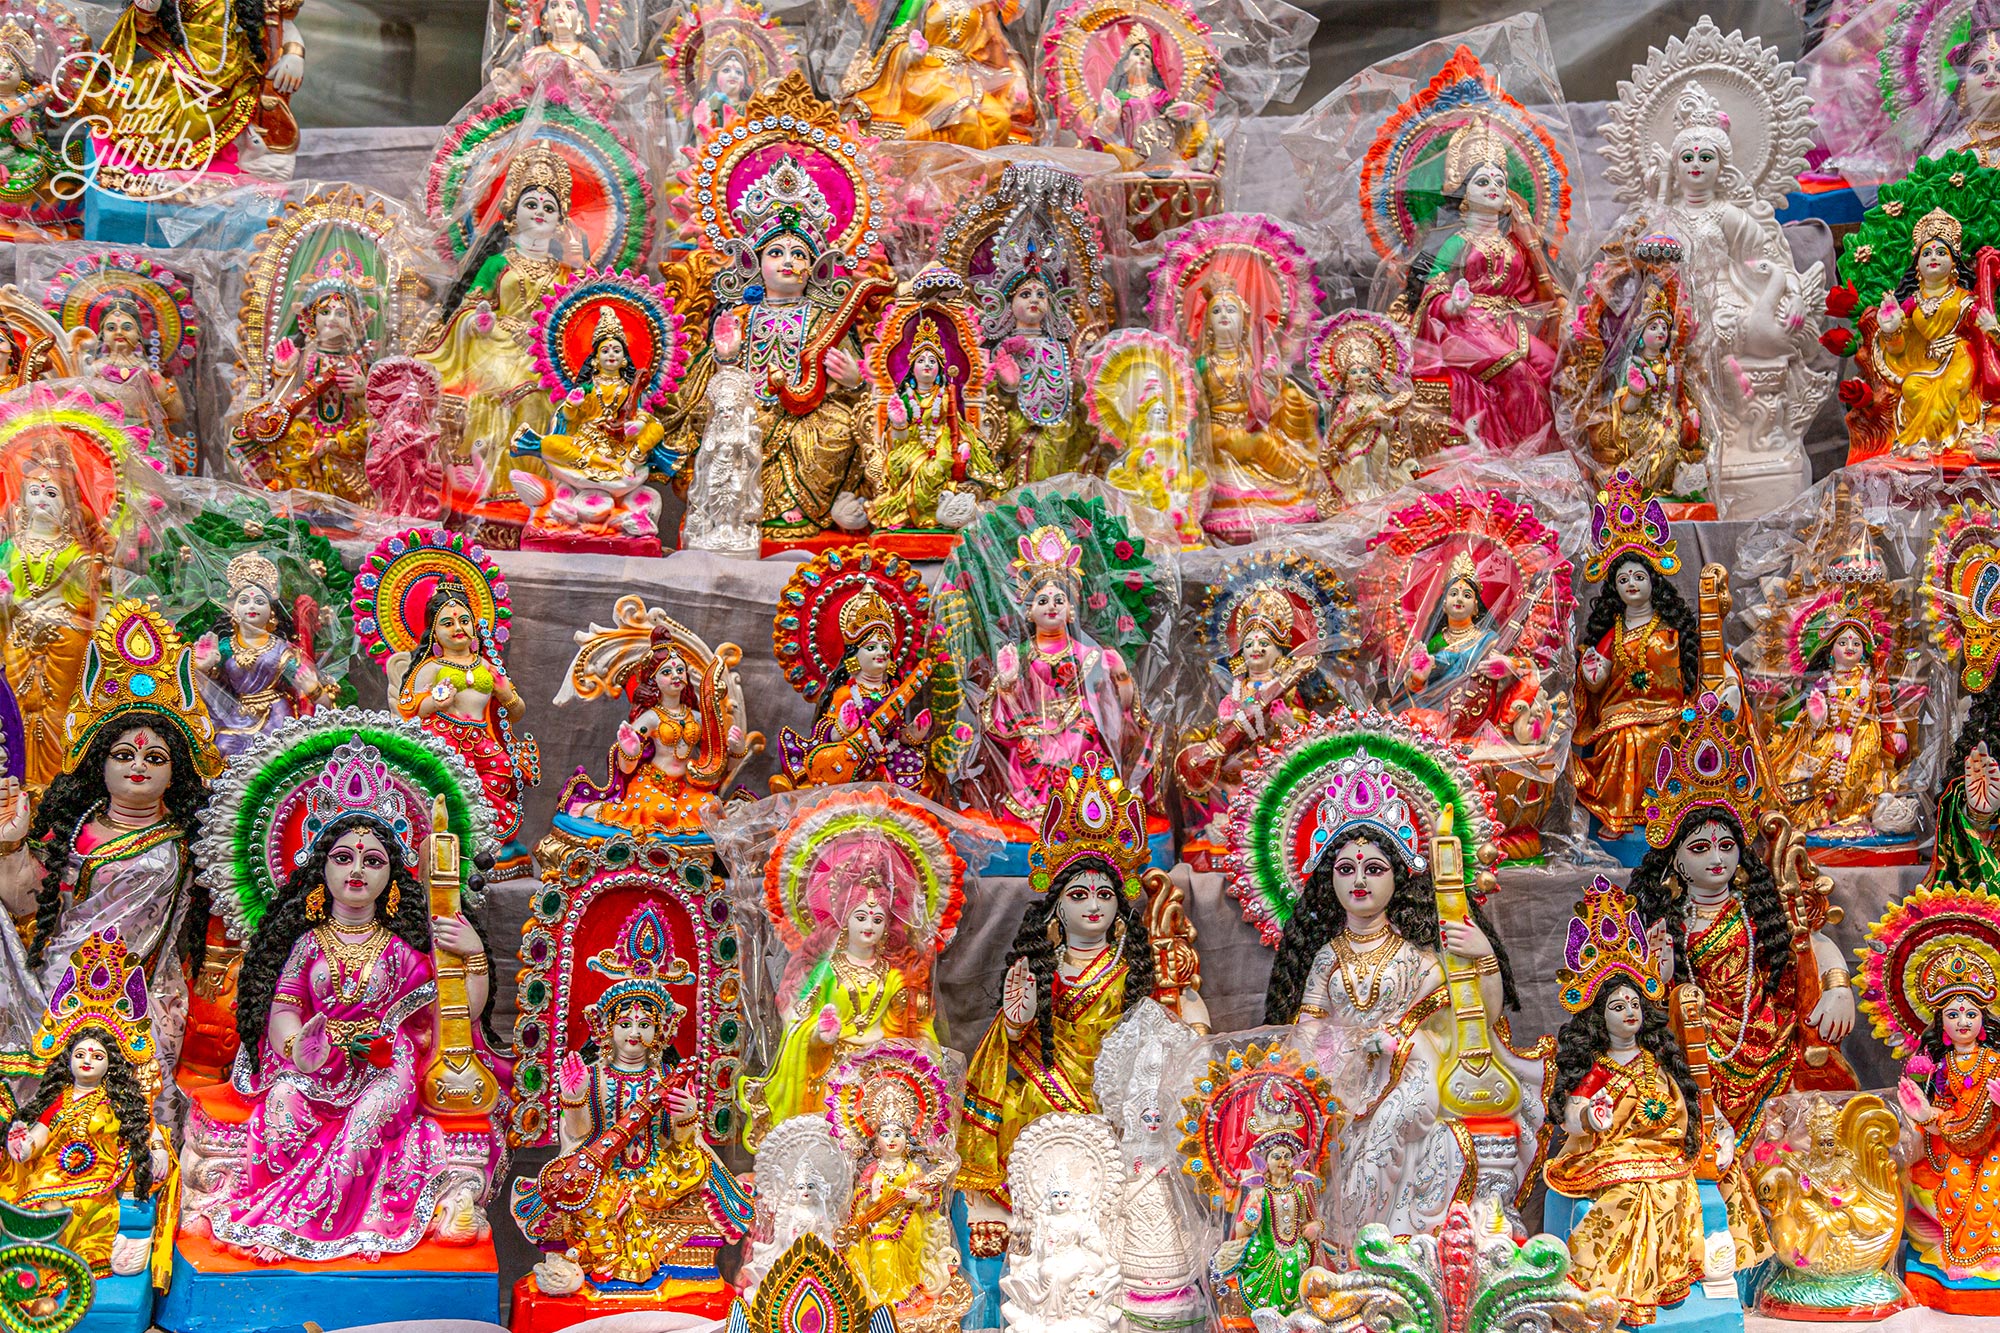 These much smaller gods and goddesses are used inside people's homes